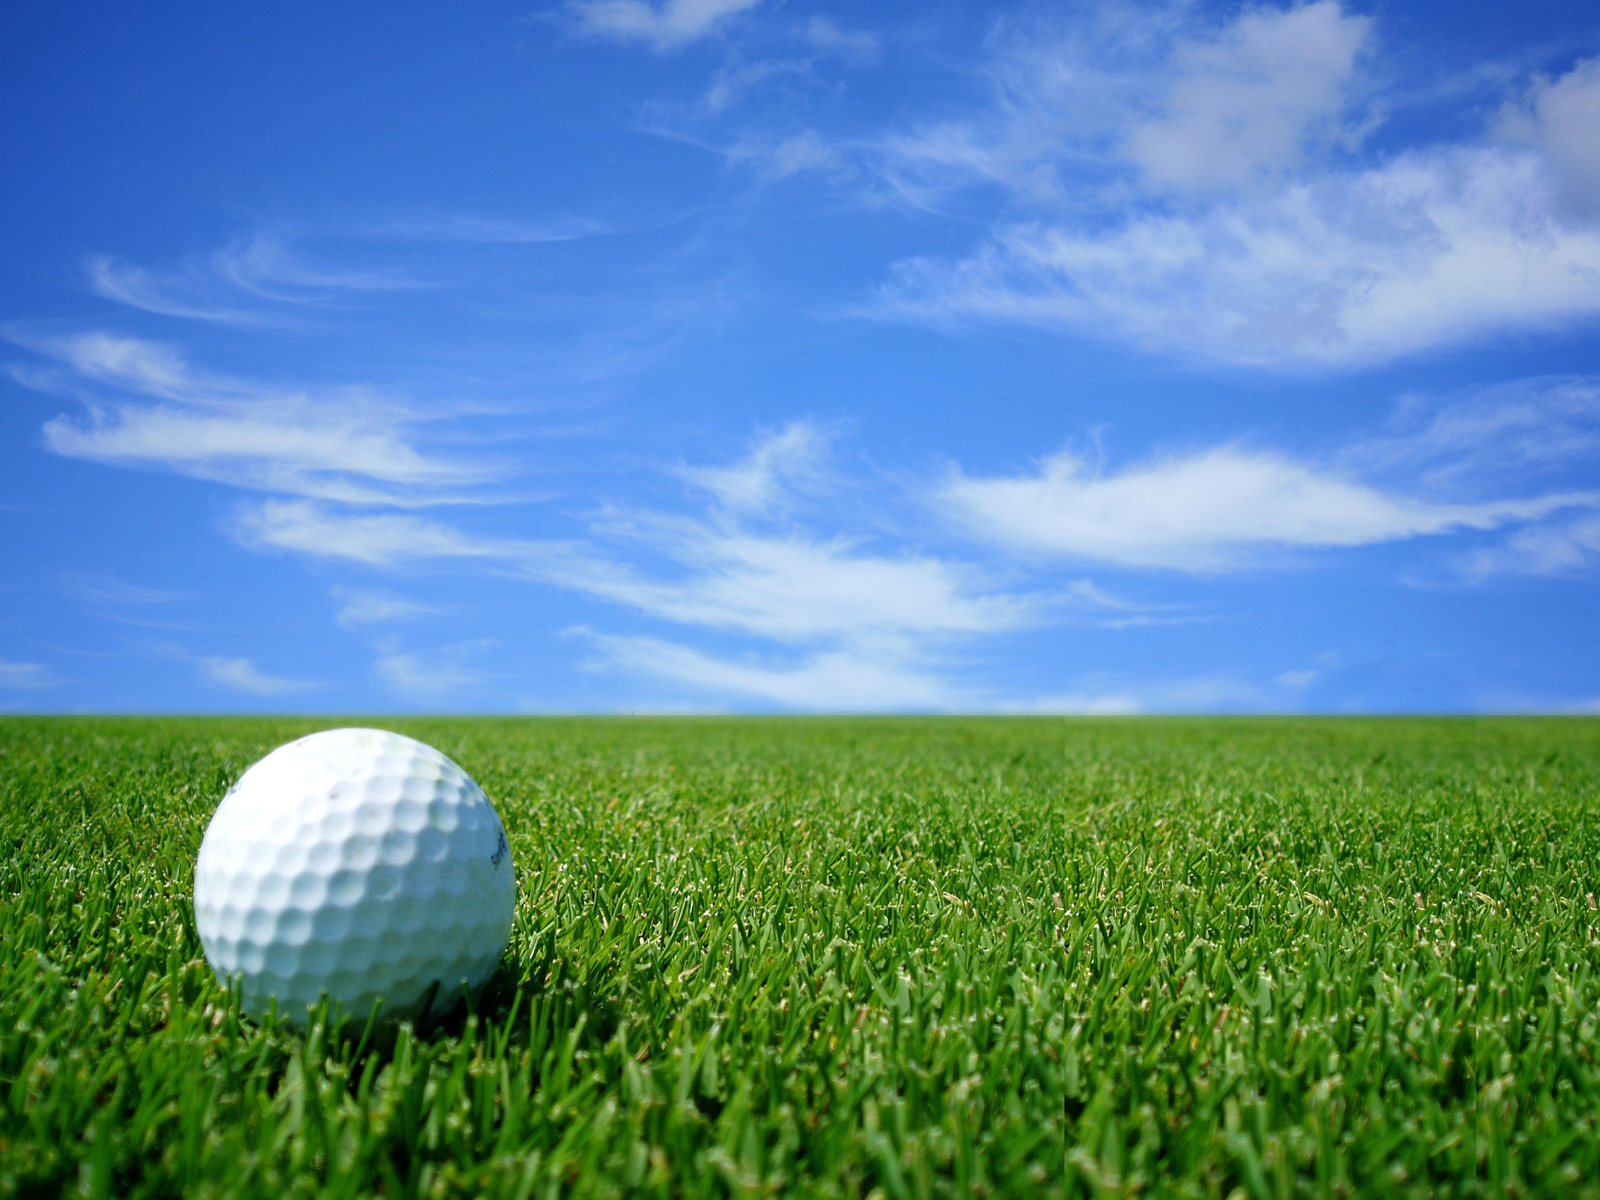 Golf pictures wallpaper